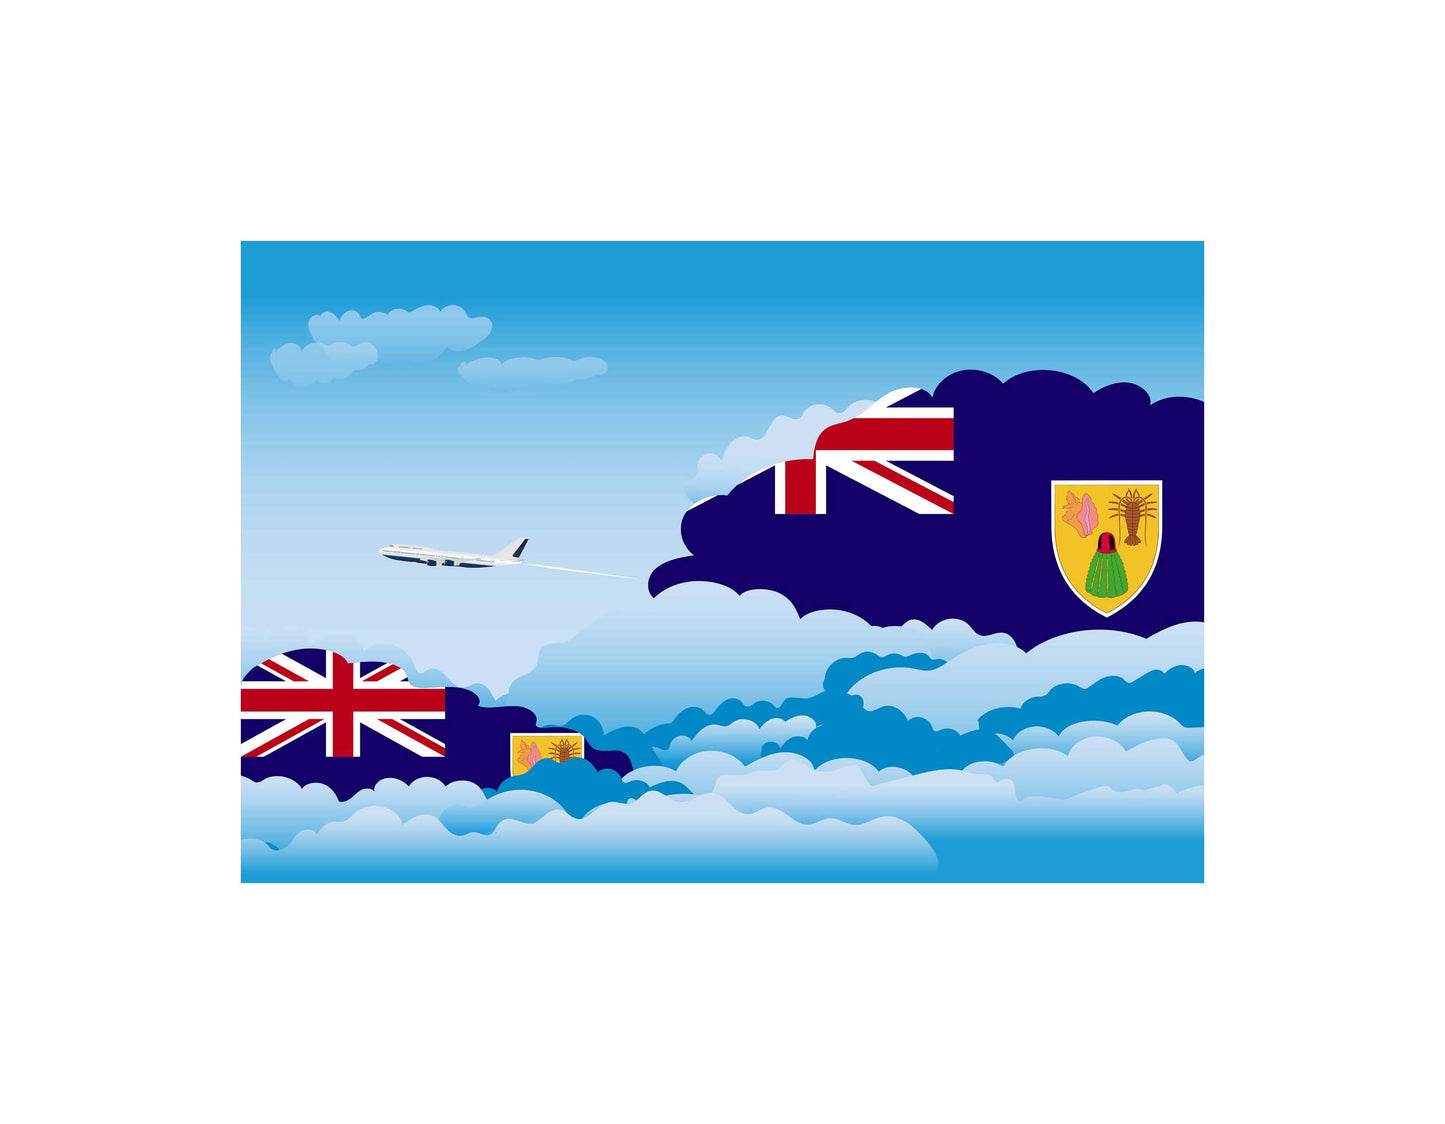 Turks and Caicos Islands Flag Day Clouds Aeroplane Airport Flying Vector Illustration